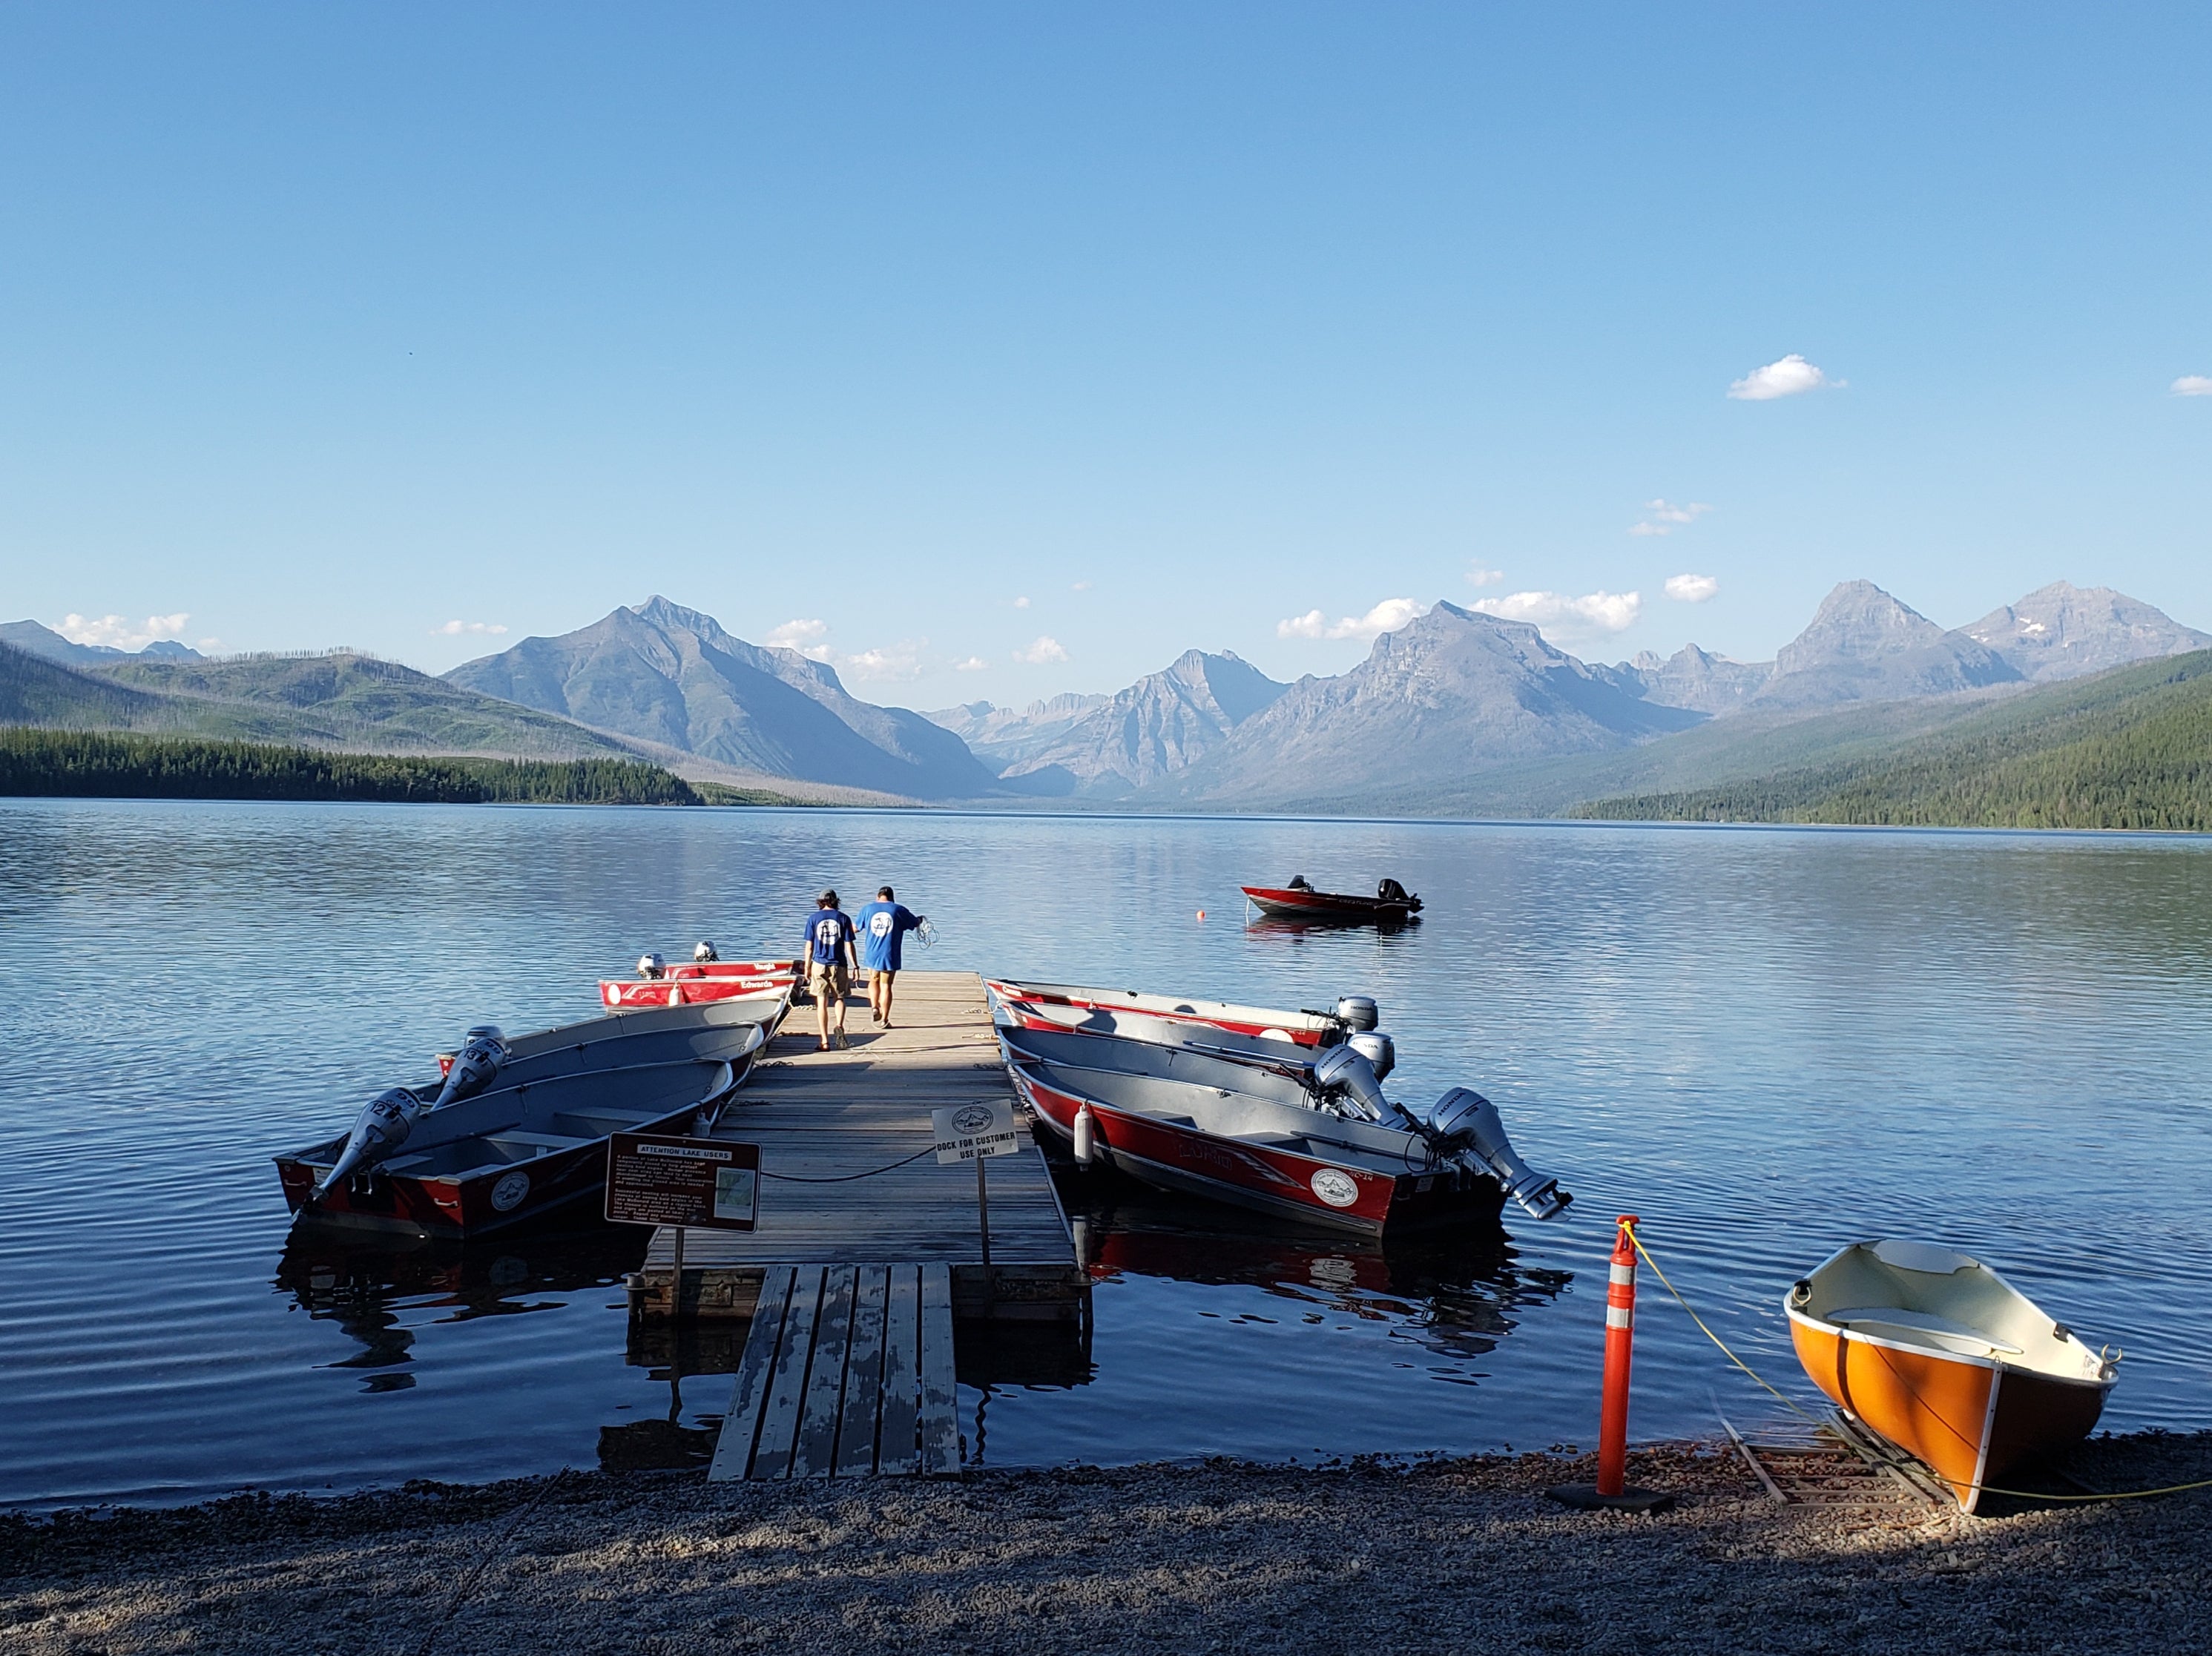 The cool water of Lake McDonald in Glacier National Park